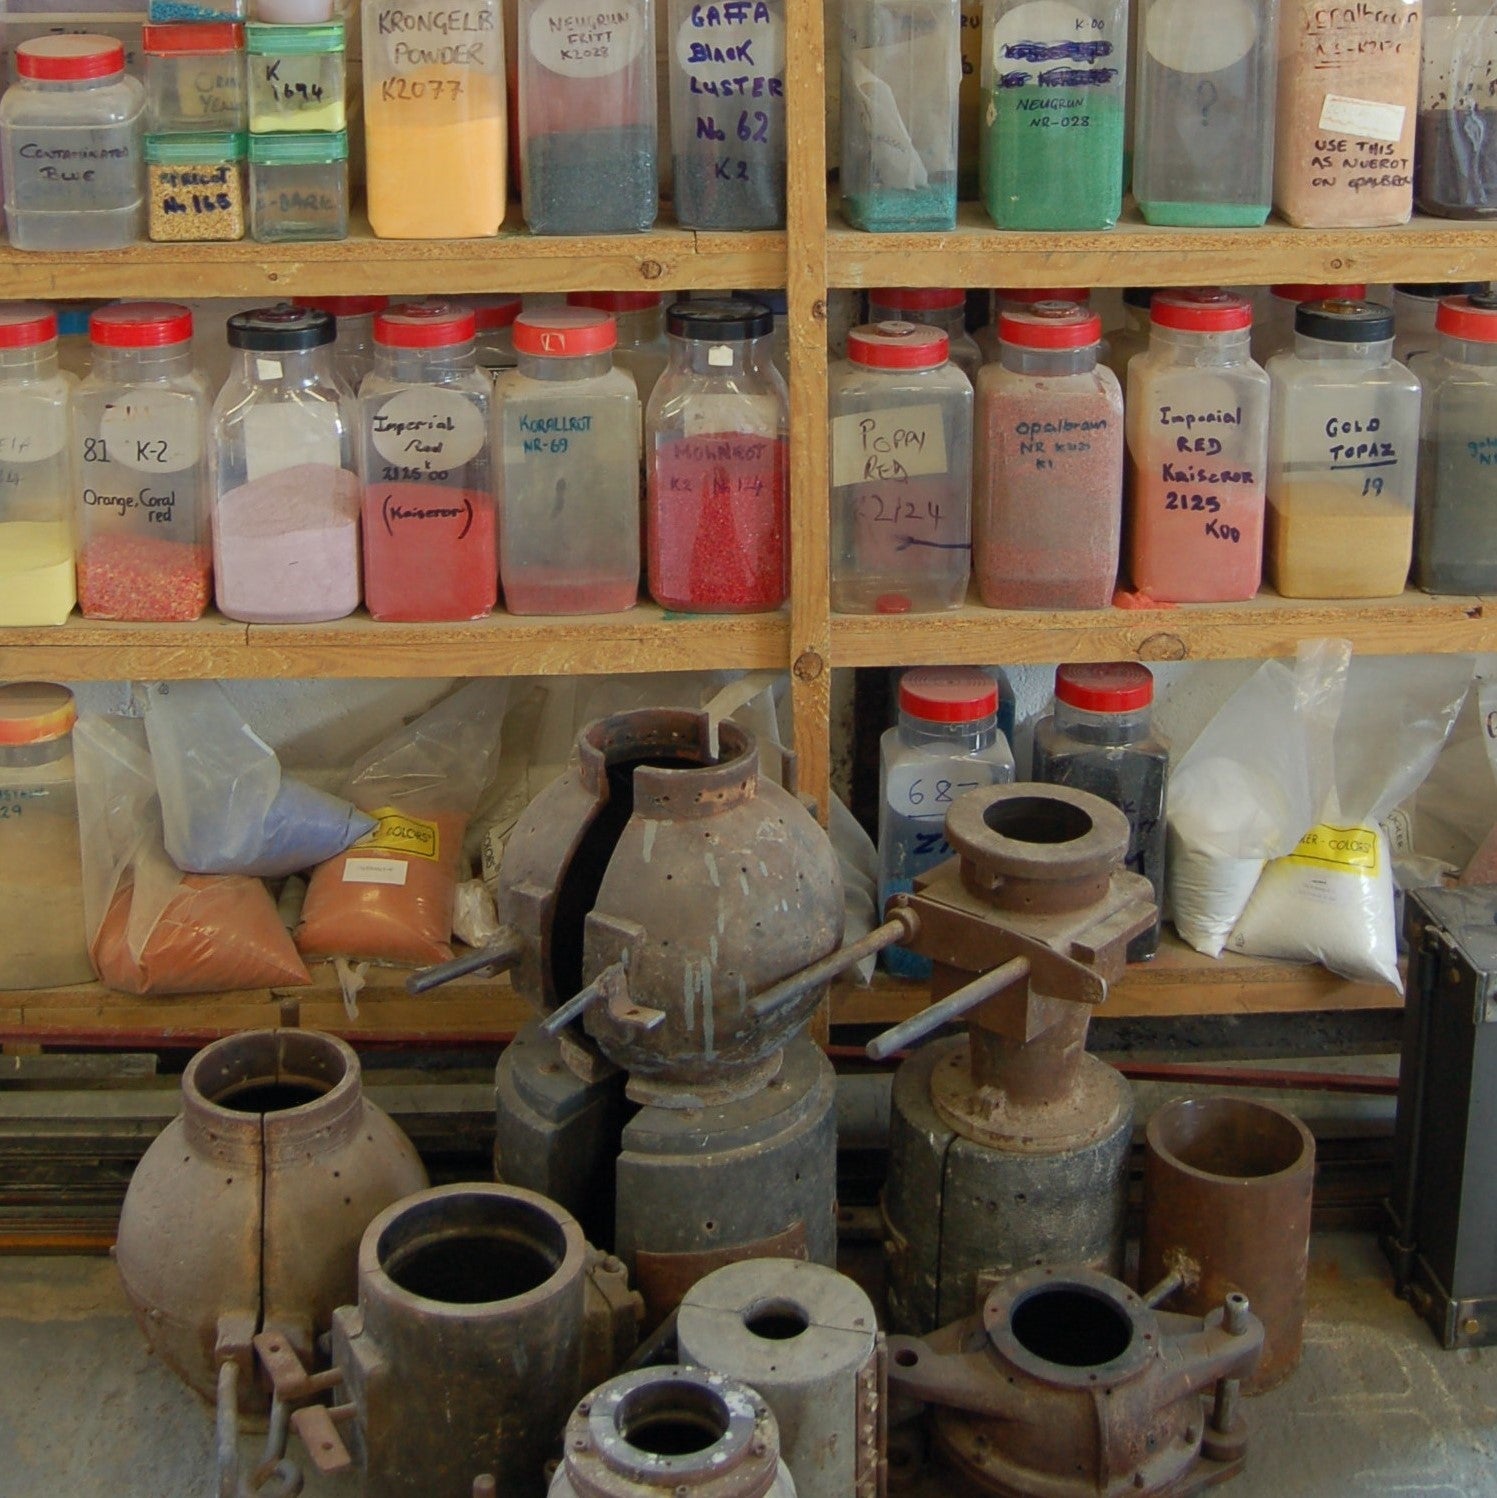 We have a selection of moulds which are used for making lampshades. We have a large variety of powders, fritts and bars.